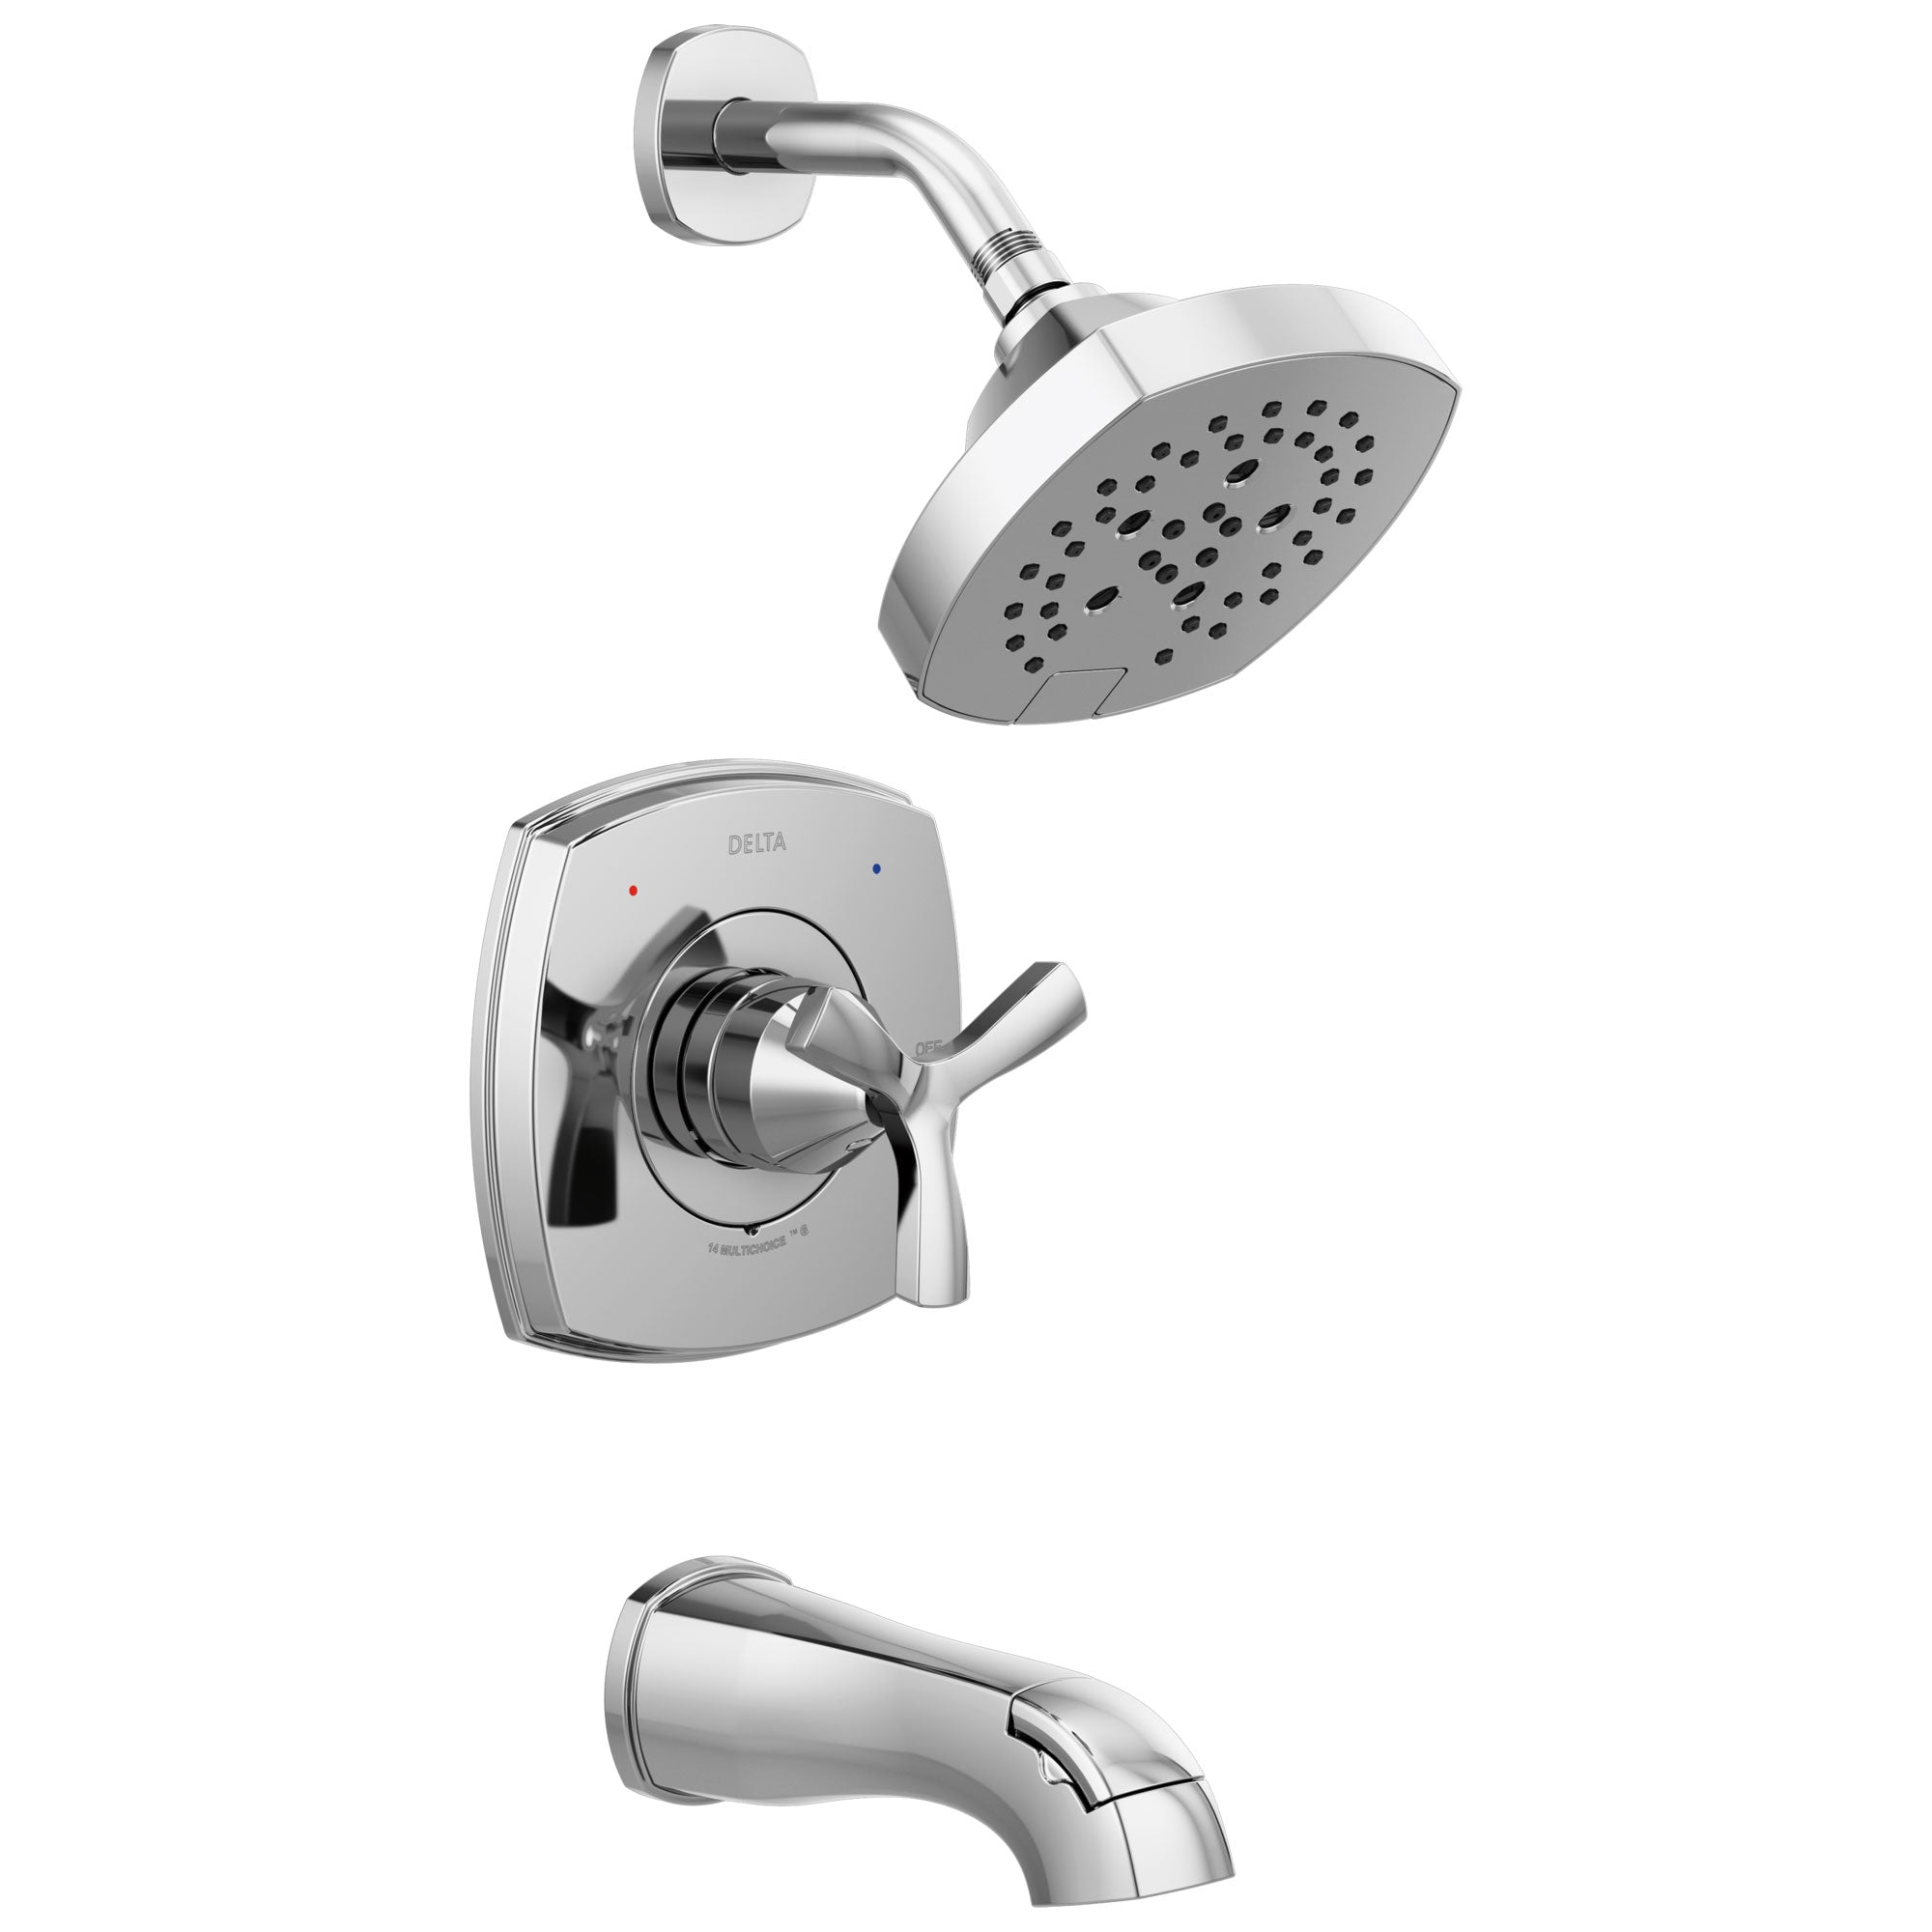 Delta Stryke Chrome Finish 14 Series Tub and Shower Combination Faucet Includes Helo Cross Handle, Cartridge, and Valve with Stops D3442V